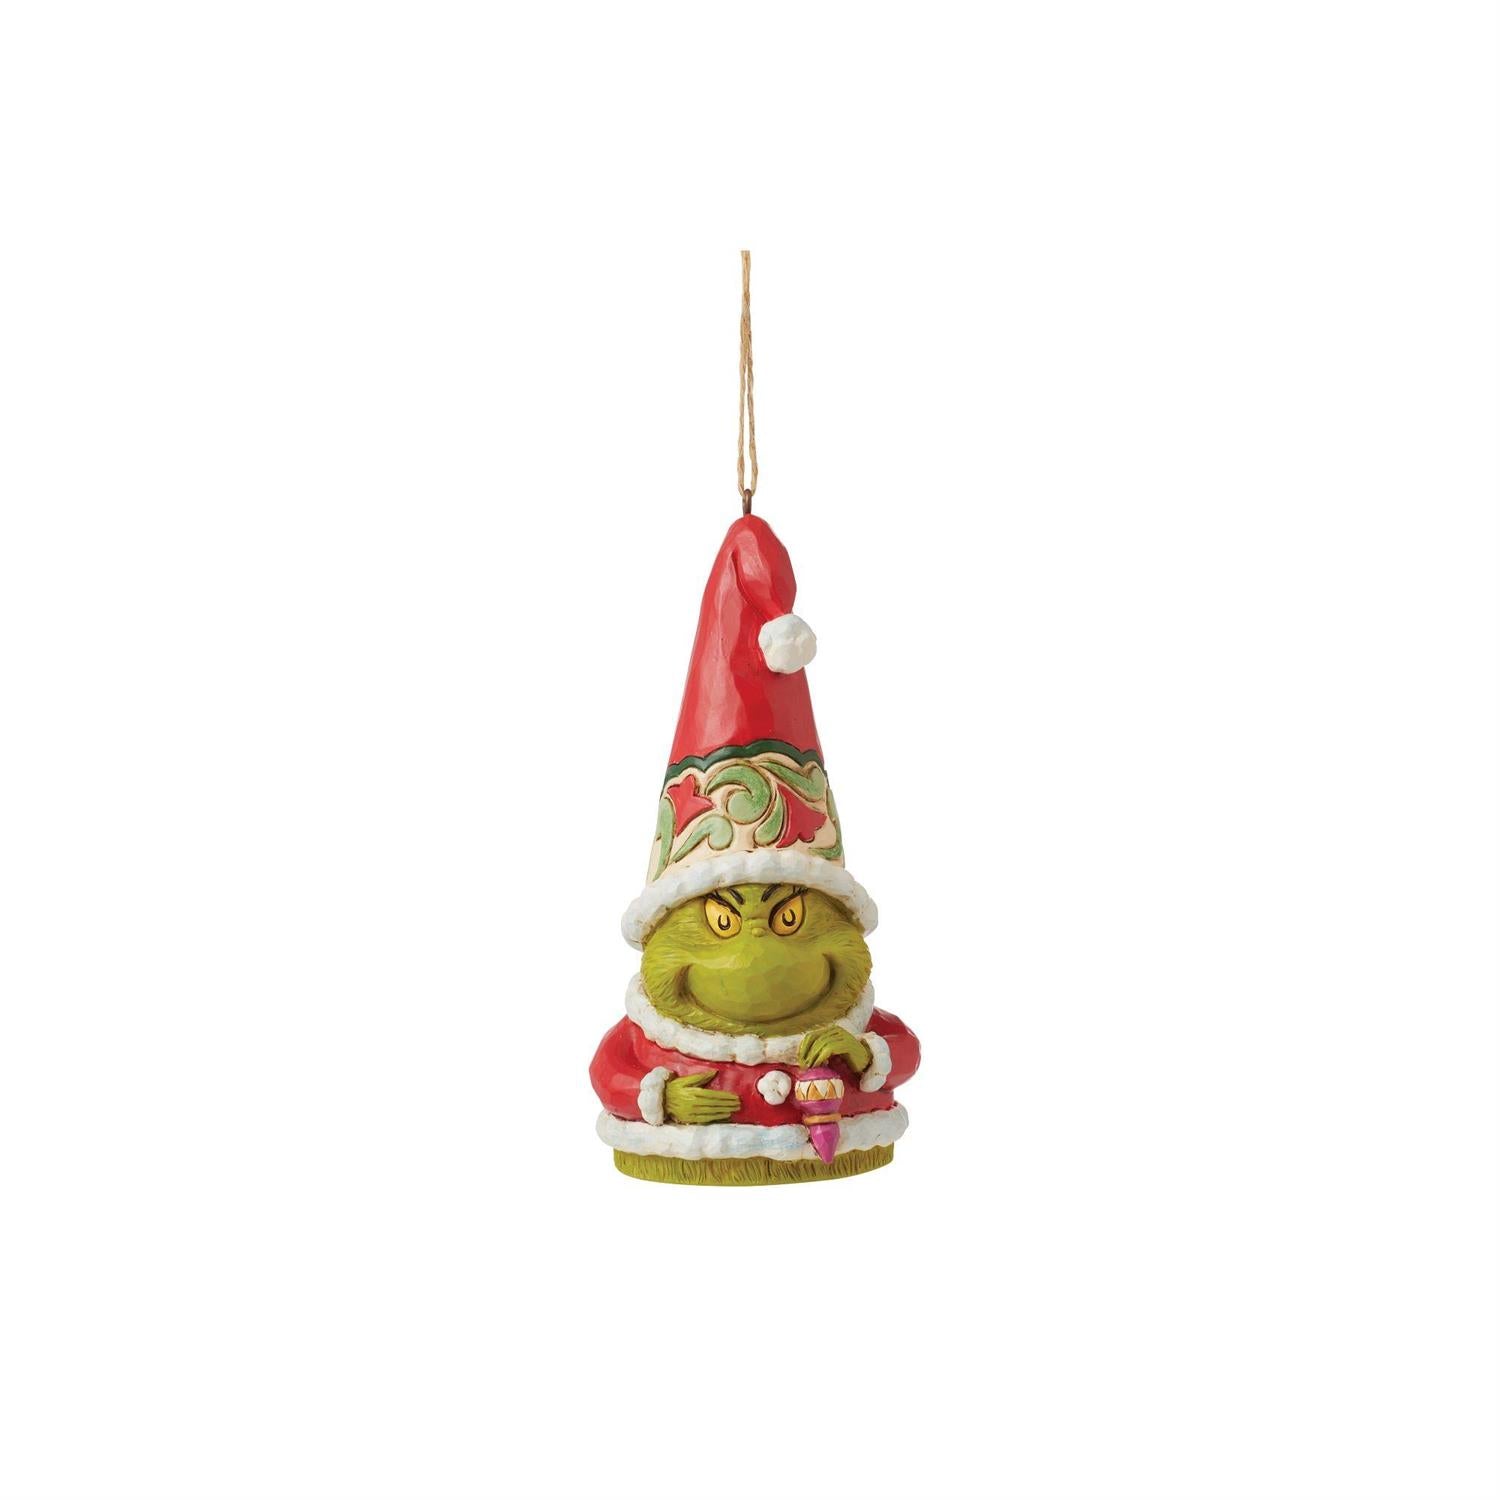 Jim Shore's Dr. Suess inspired Grinch Gnome hanging Christmas ornament with Grinch Gnome dressed in Santa outfit holding a Christmas ornament.